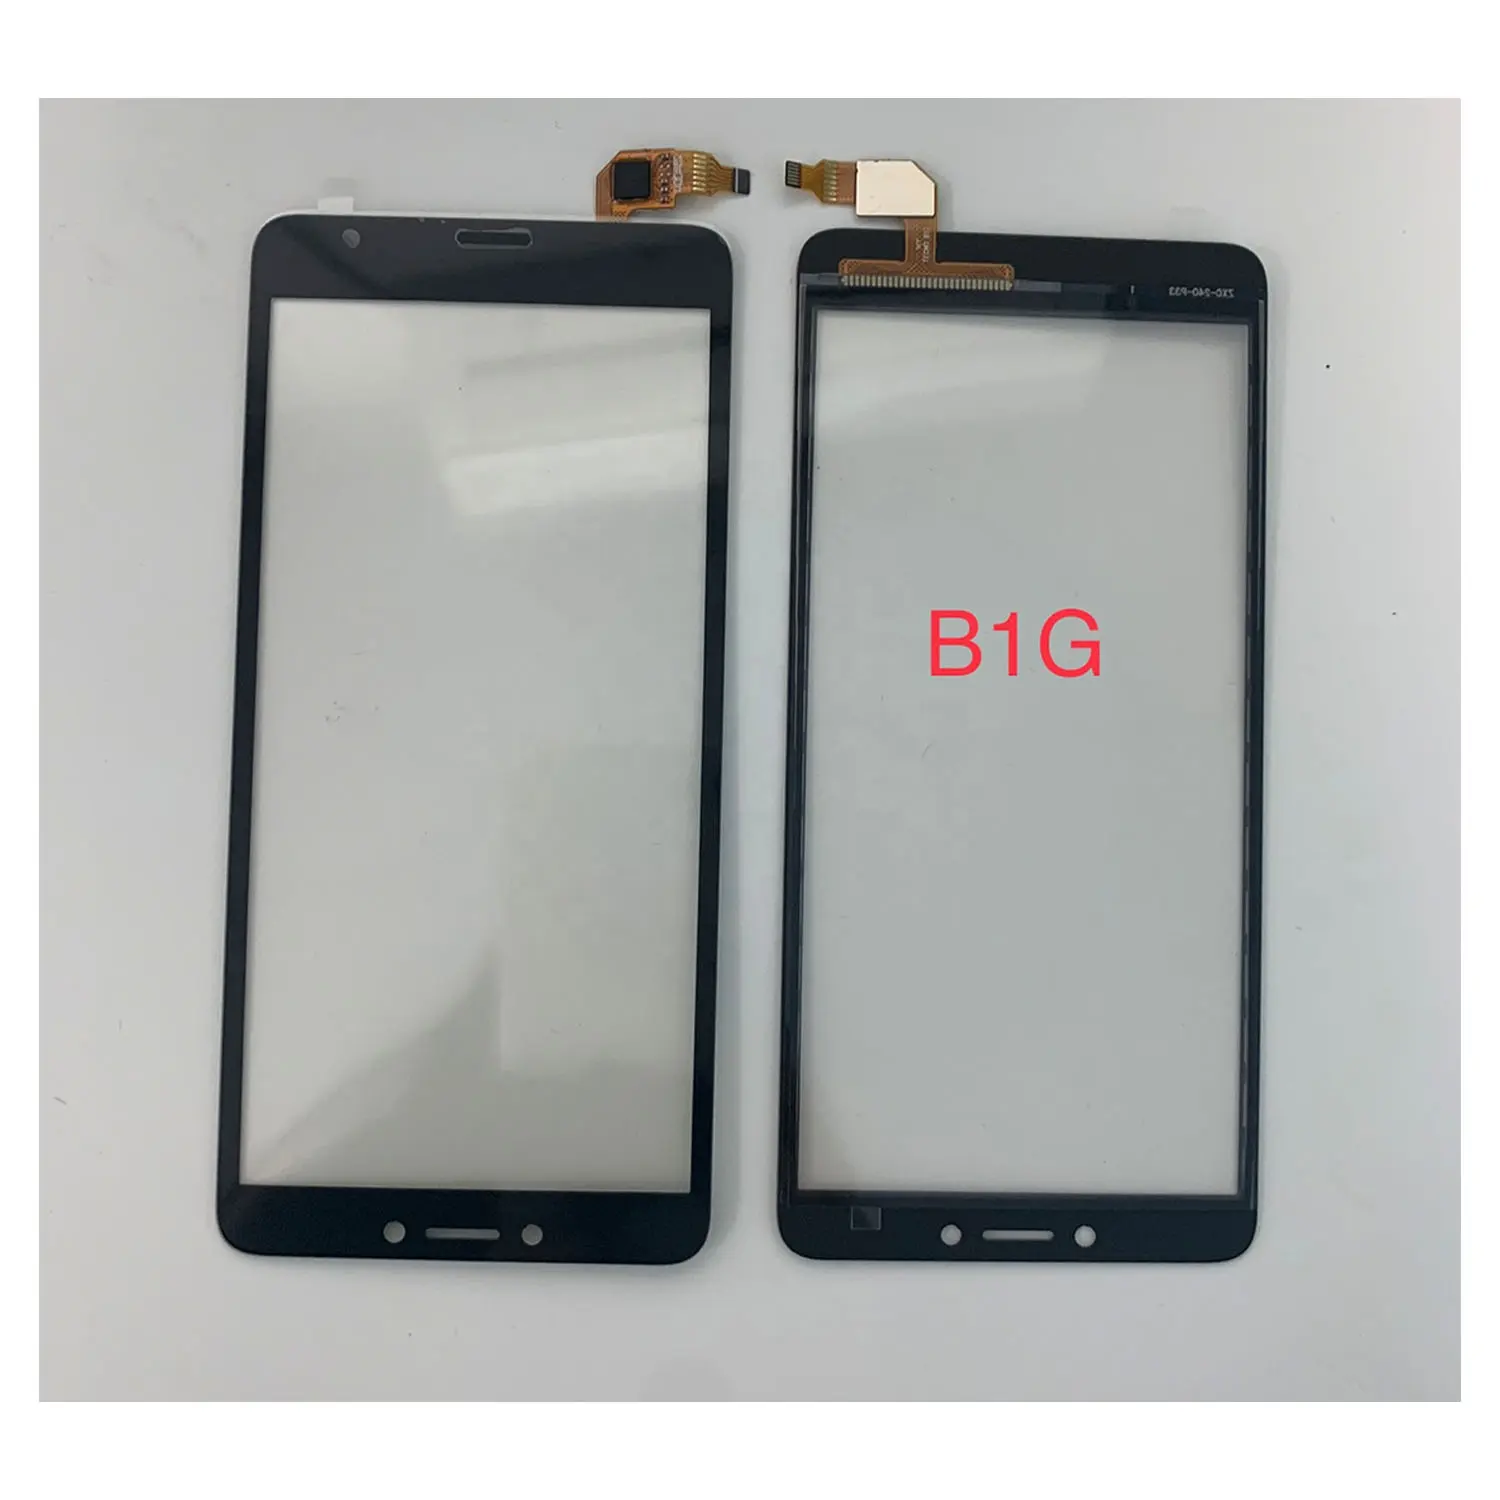 B1G Mobile Phone LCD Assembly For tecno B1G itel A32F A16+ A16 A33 LCD Display Touch Screen Digitizer